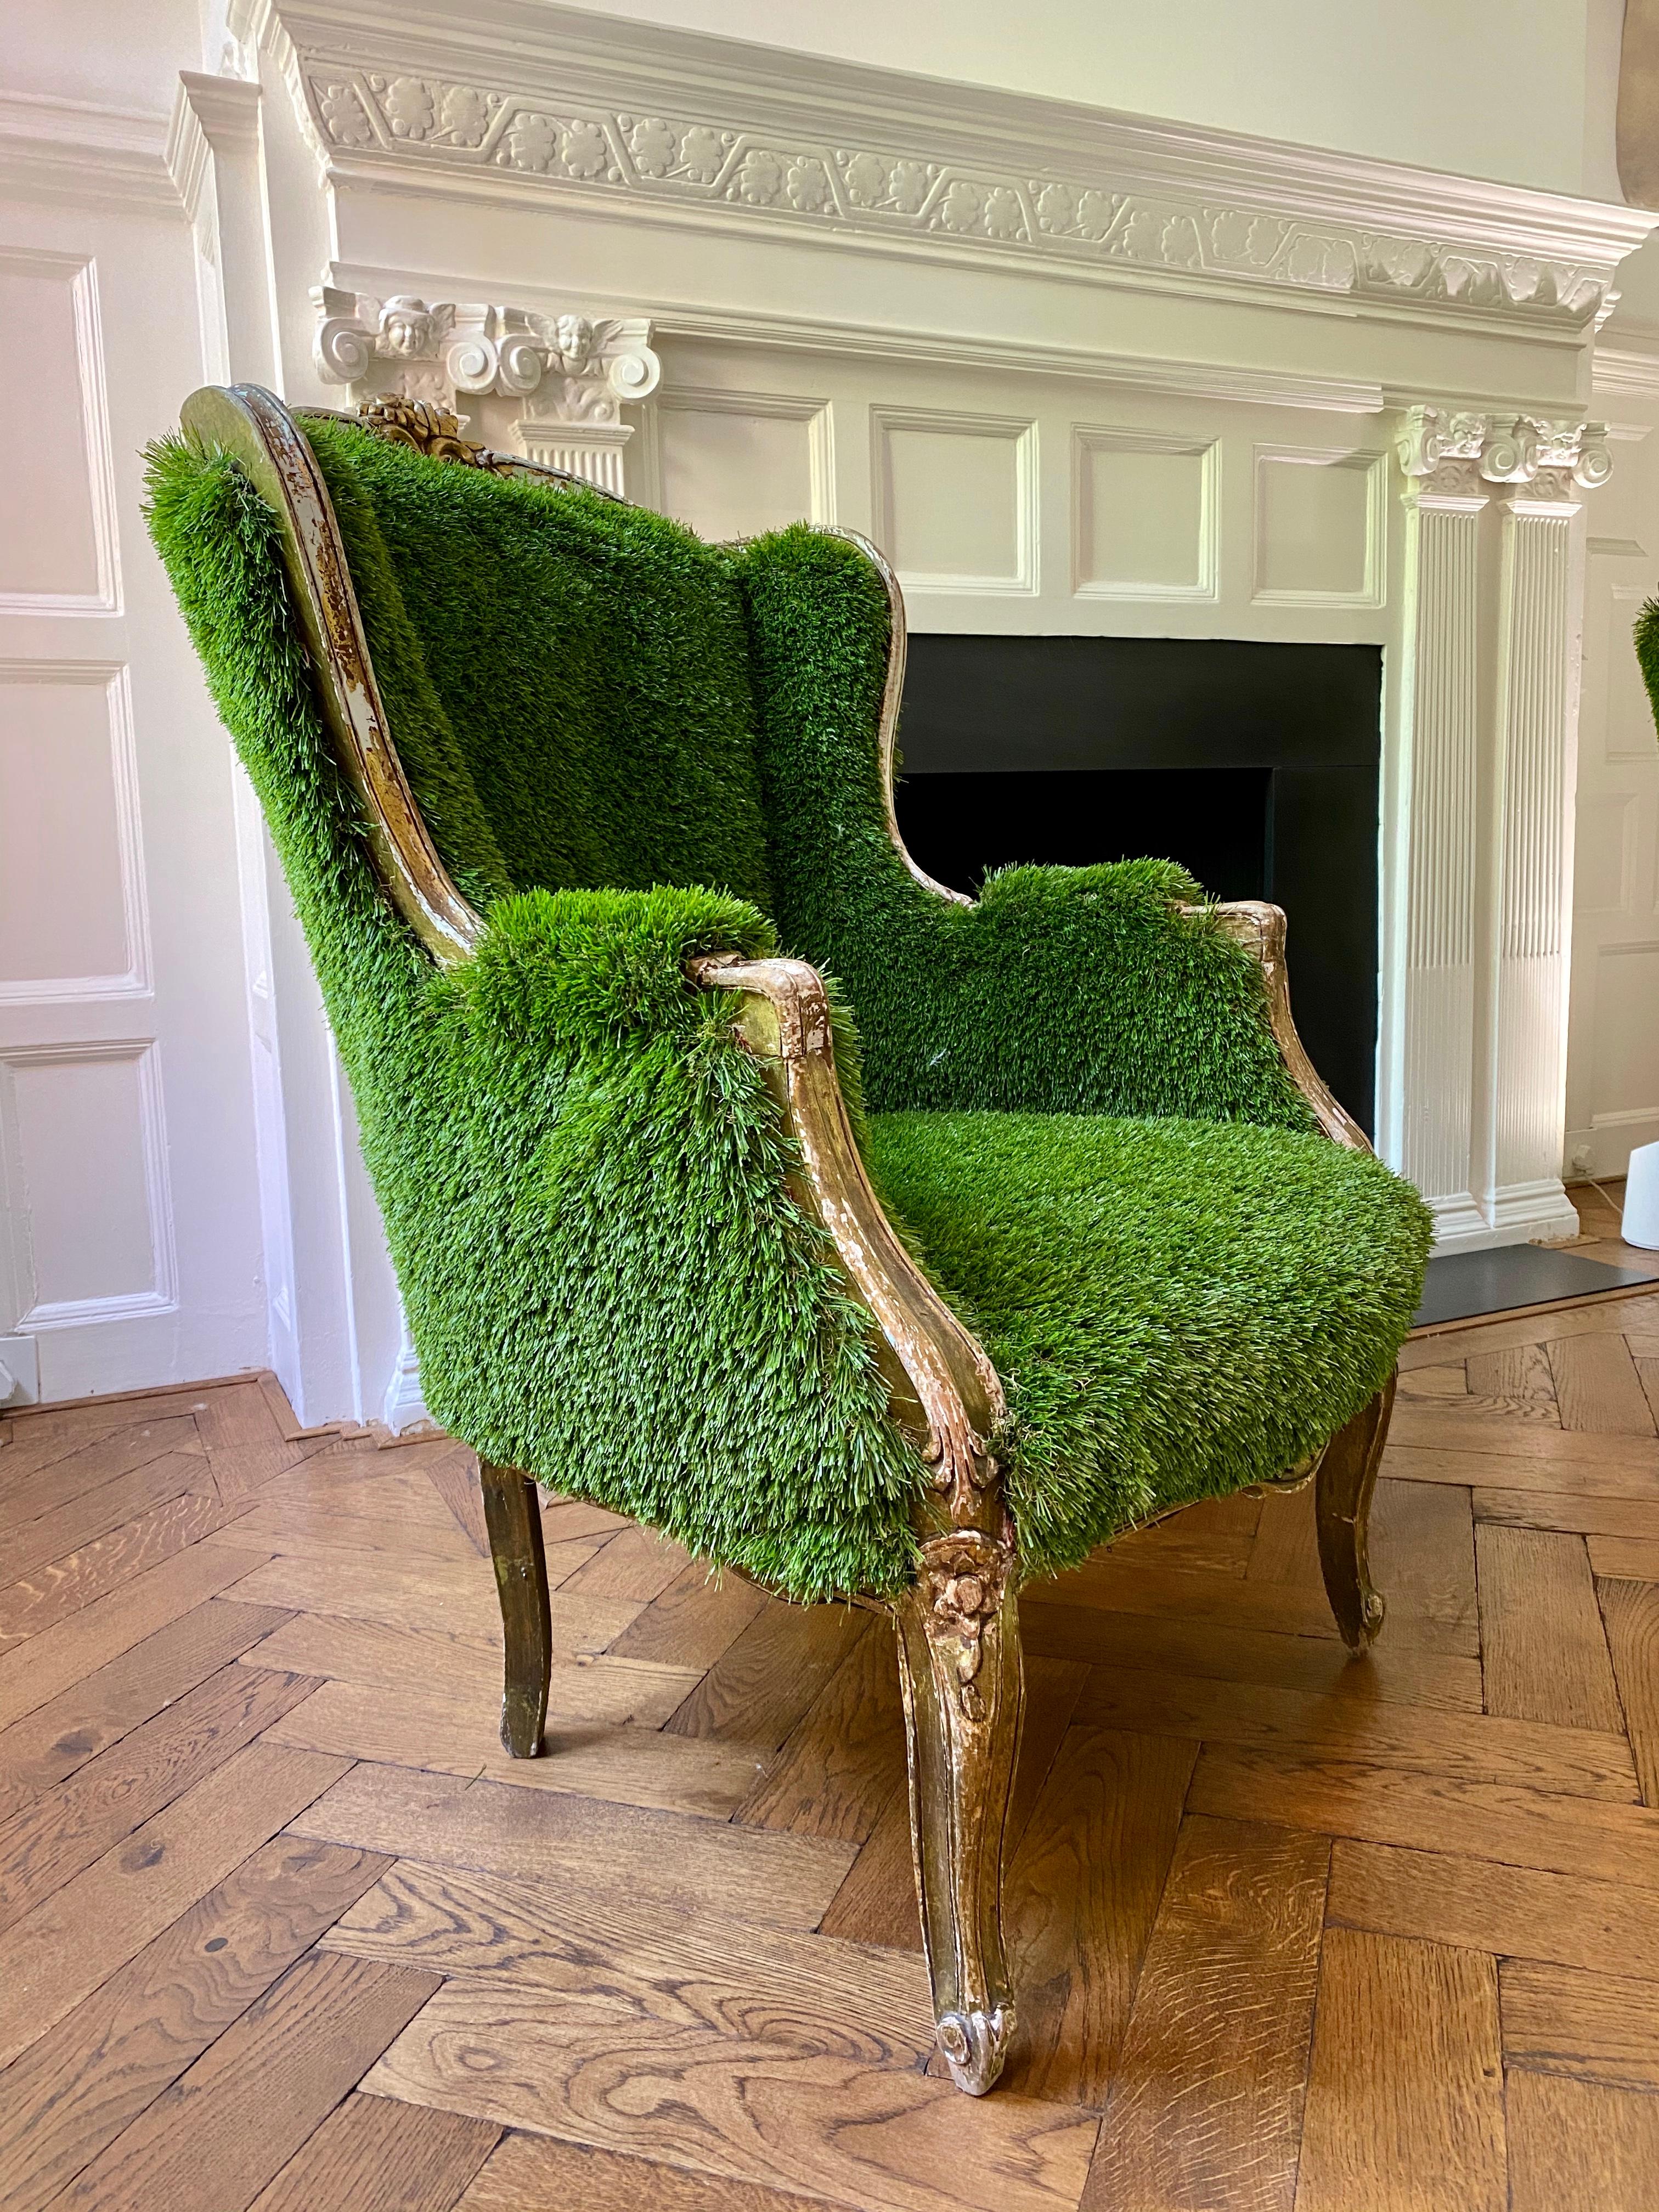 Giltwood Pair of French Bergère Louis XV Style Chairs Re-Upholstered in Faux Grass